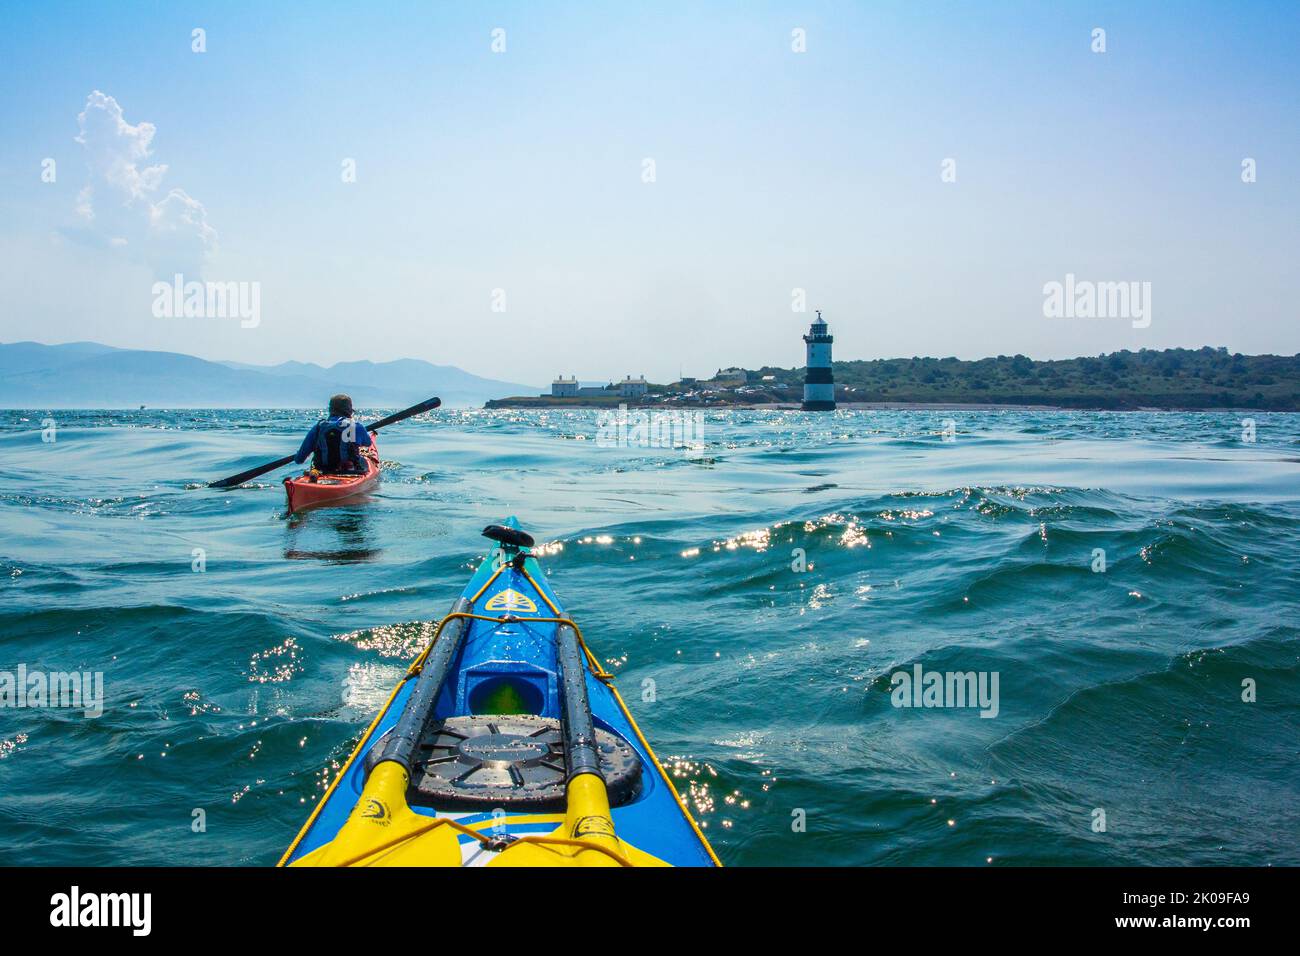 Sea kayaking near Trwyn Du Lighthouse, also known as Penmon Lighthouse off Puffin Island on the coast of Anglesey, Wales UK Stock Photo